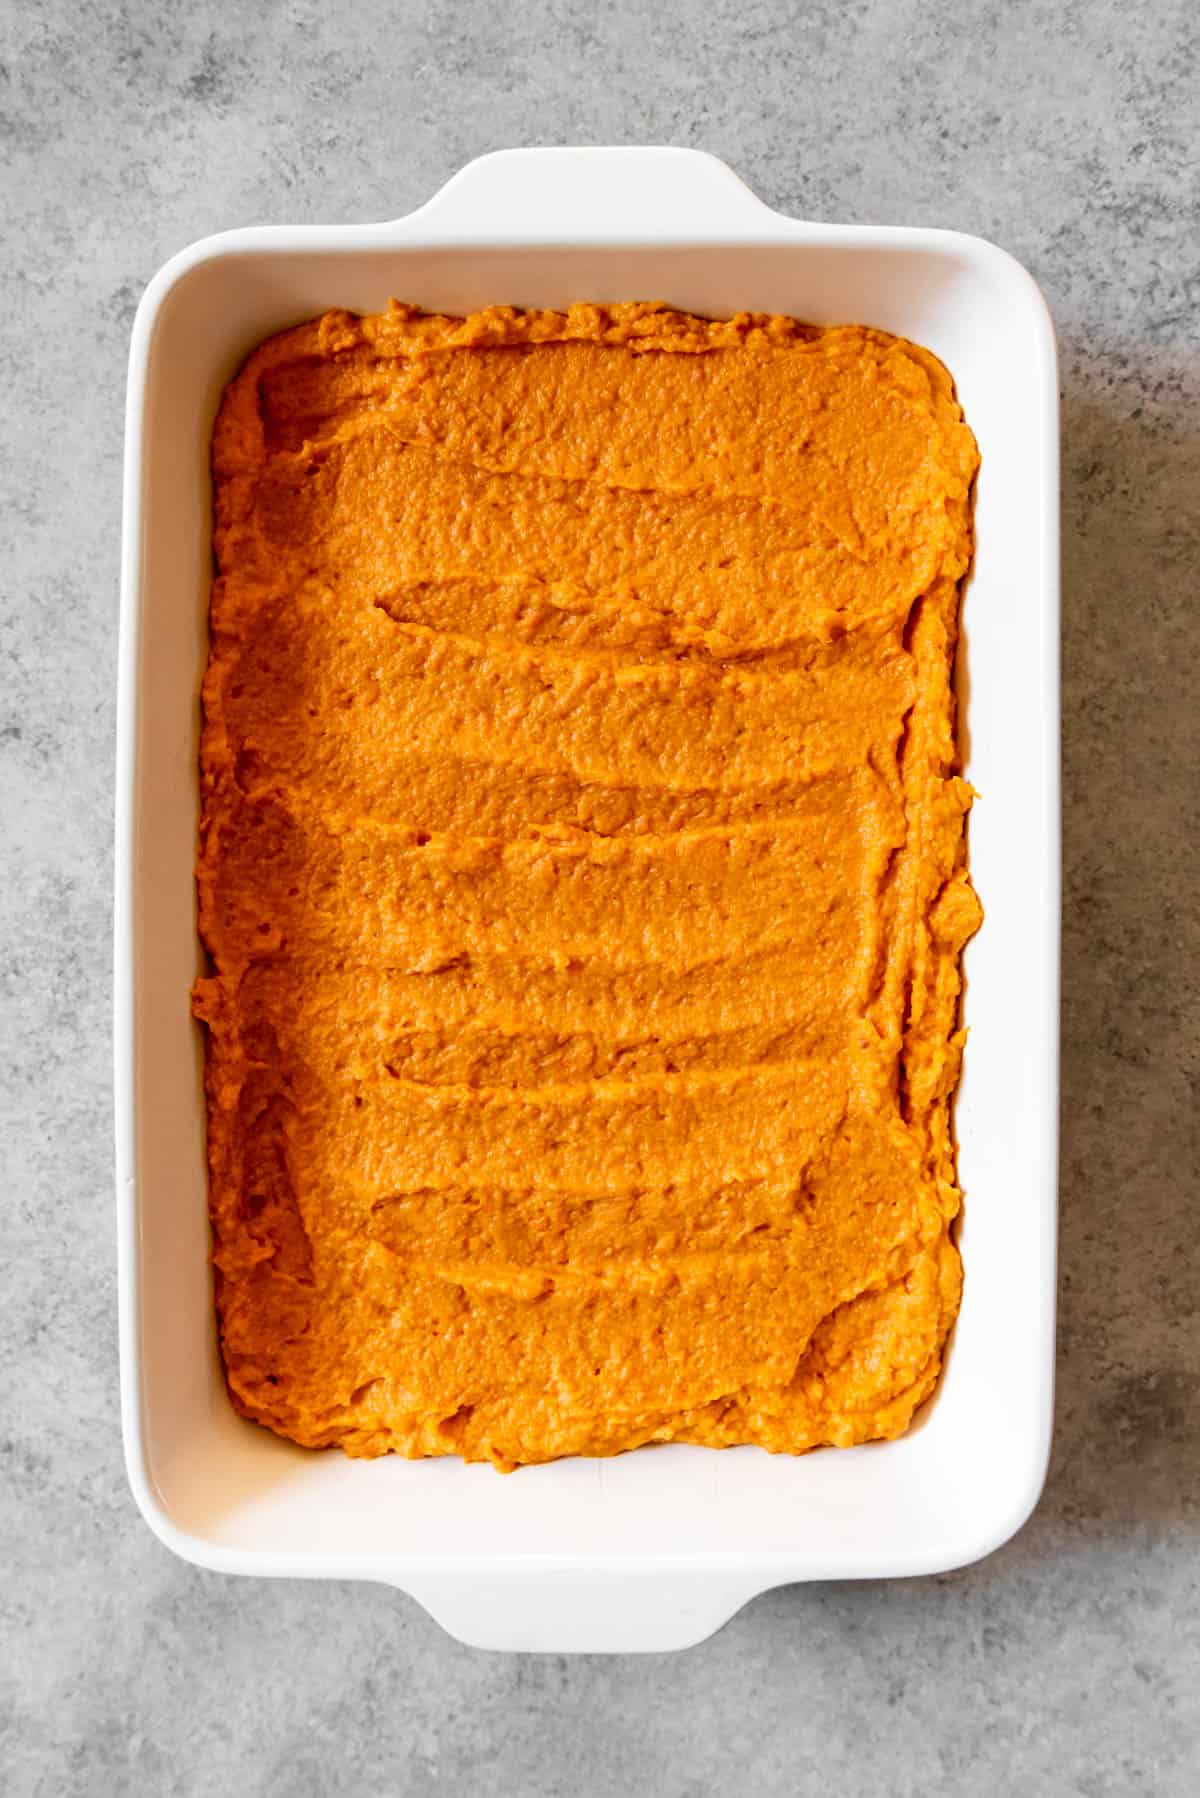 An image of mashed sweet potatoes with brown sugar, milk, butter, and cinnamon in a serving dish, ready to be topped with marshmallows for sweet potato casserole.